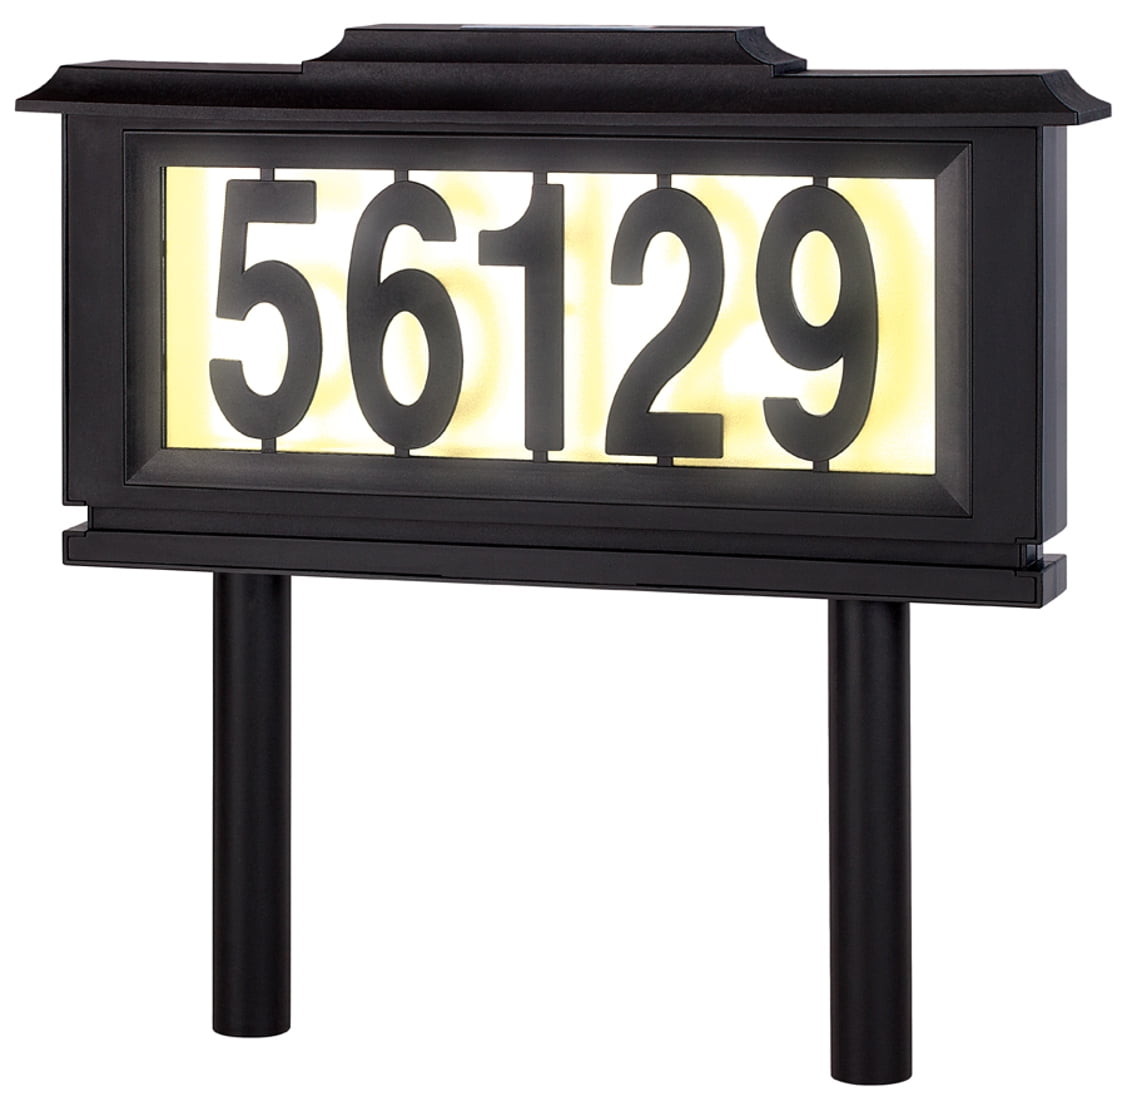 Address Plaque Outdoor Led Light, Solar Lighted House Numbers Vertical